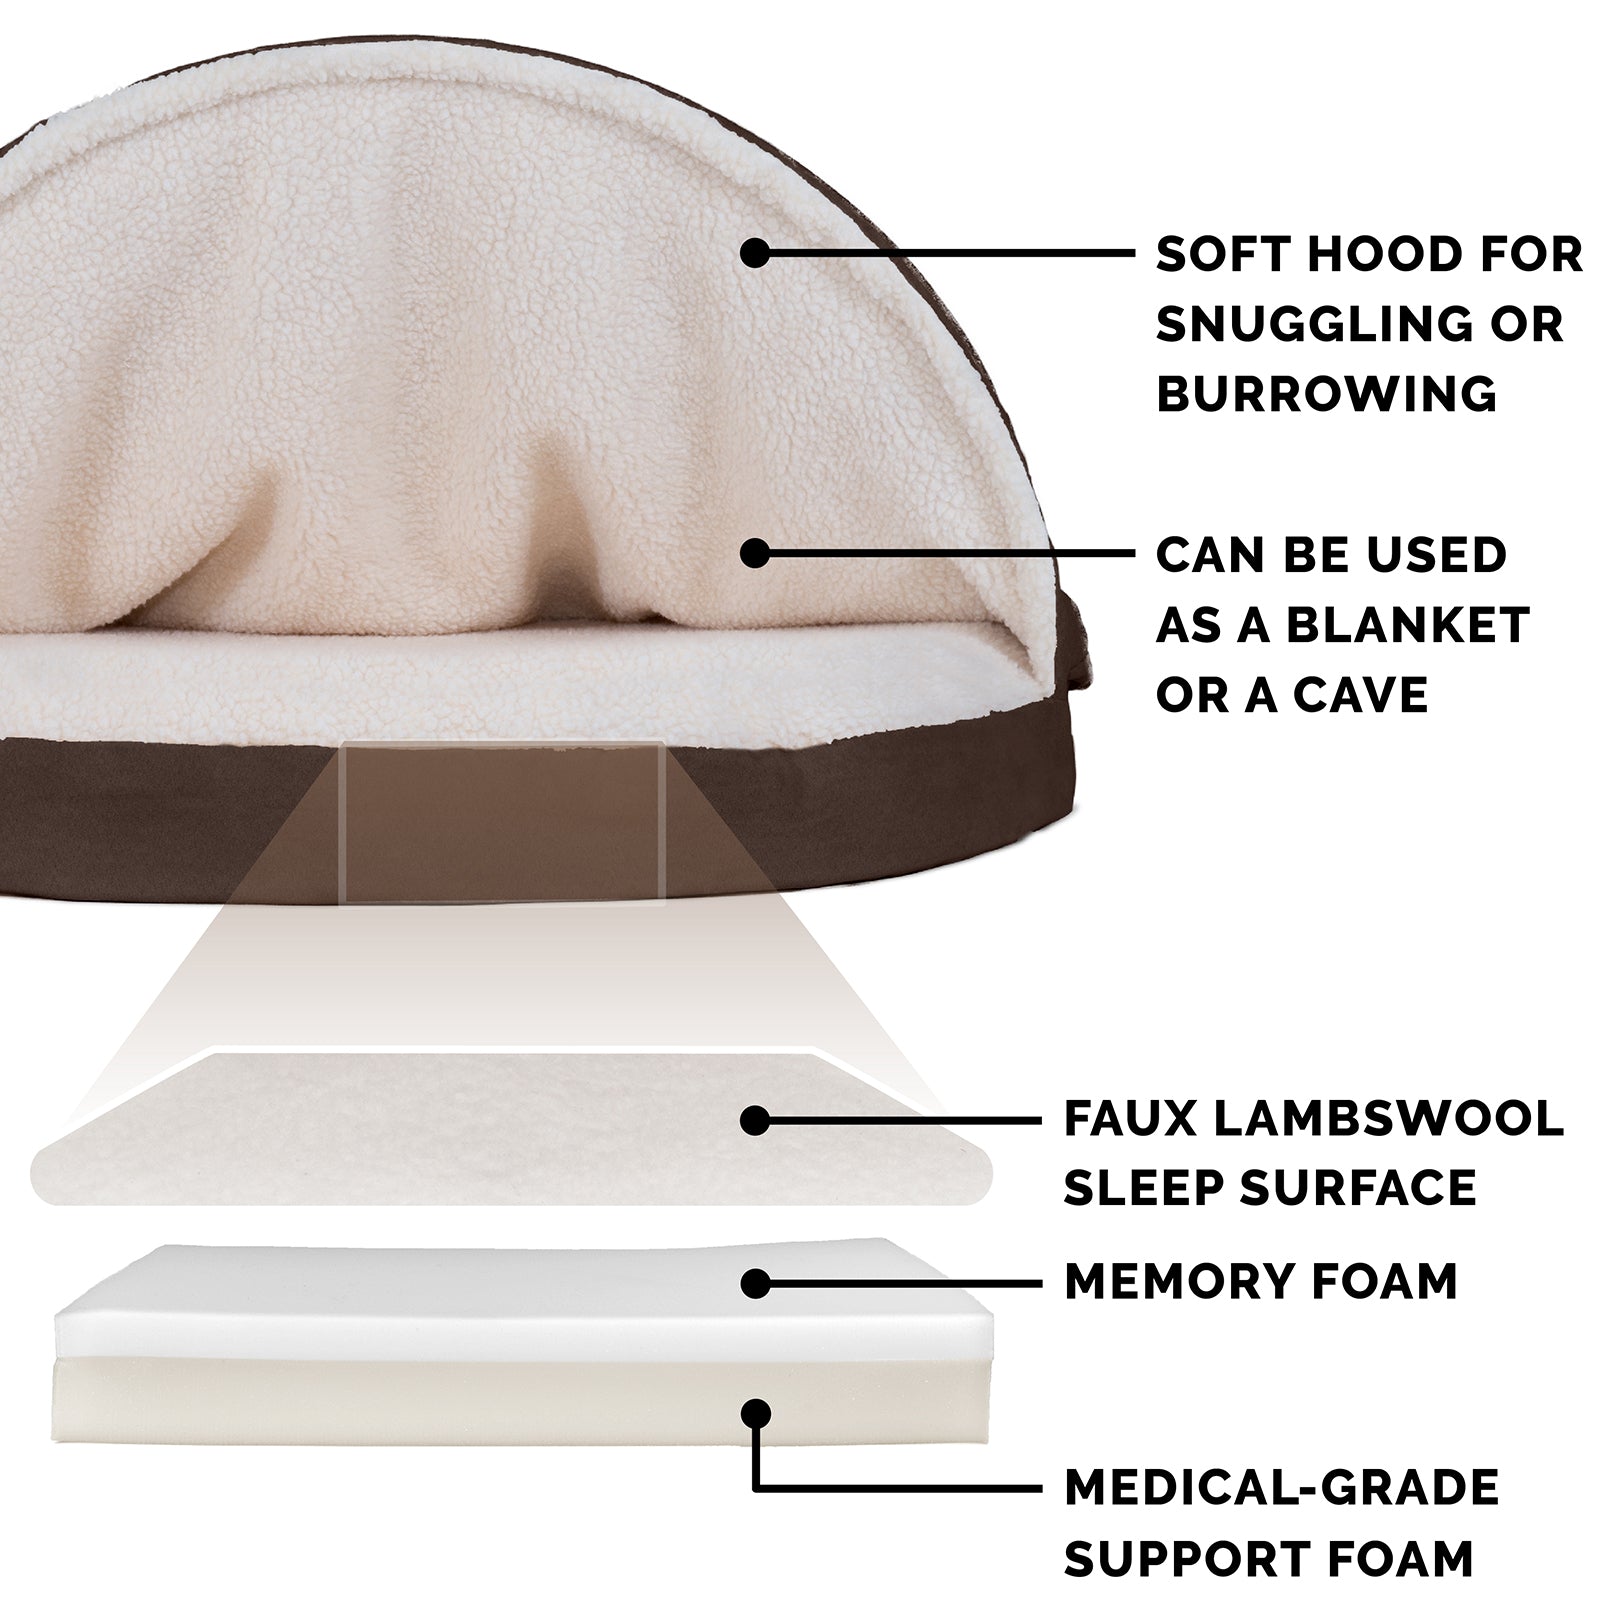 FurHaven | Memory Foam Faux Sheepskin Snuggery Burrow Pet Bed for Dogs and Cats， Espresso， 26-Inch